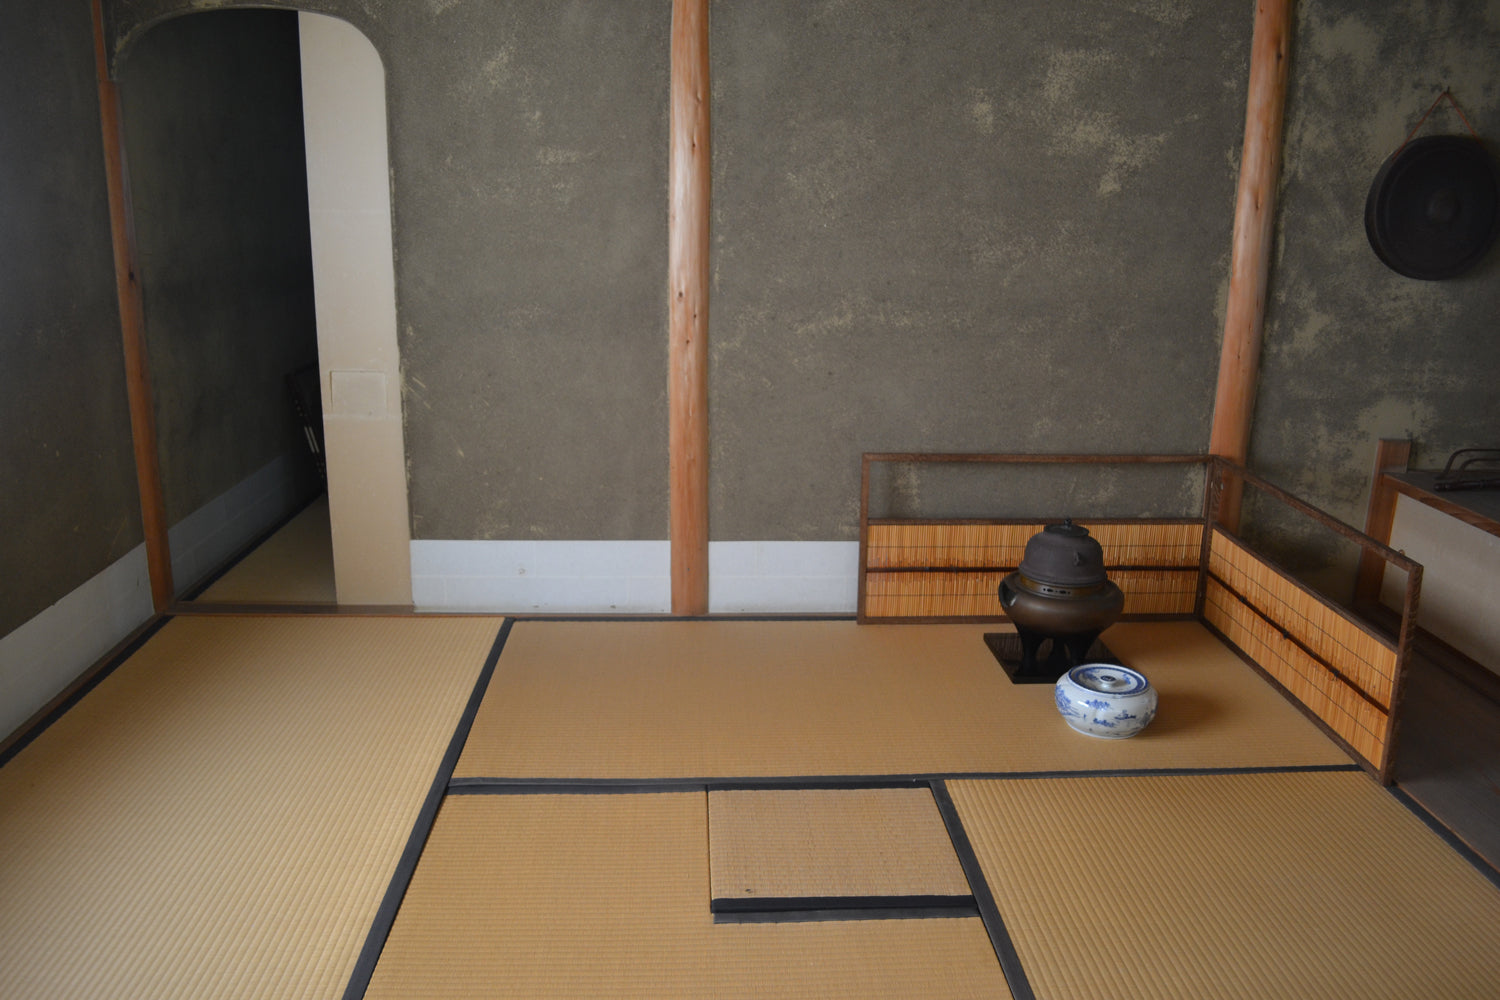 A simple, clean tea room with a “furo,” or portable brazier, and a “mizusashi,” or a “cold water container,” set in a corner, on a tatami mat.